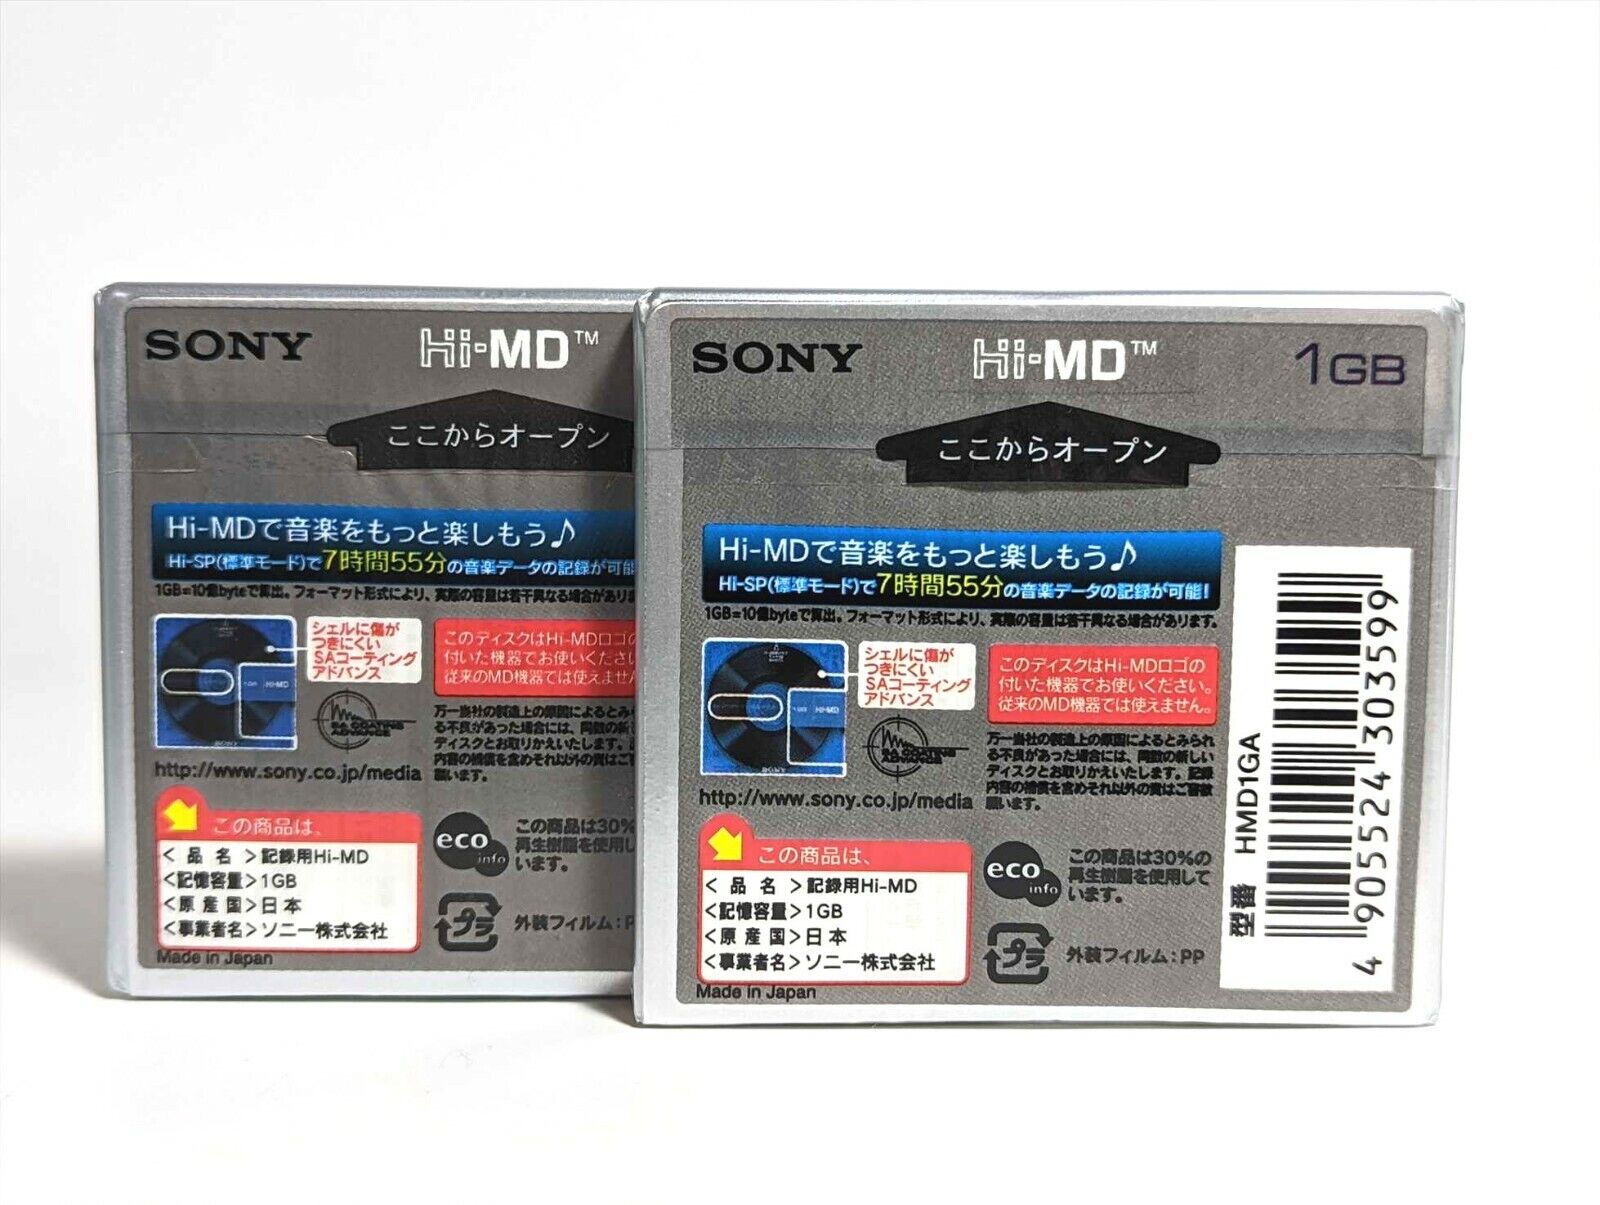 【SEALED x 2 Discs】SONY Hi-MD 1GB Recordable Mini Disc MADE IN JAPAN